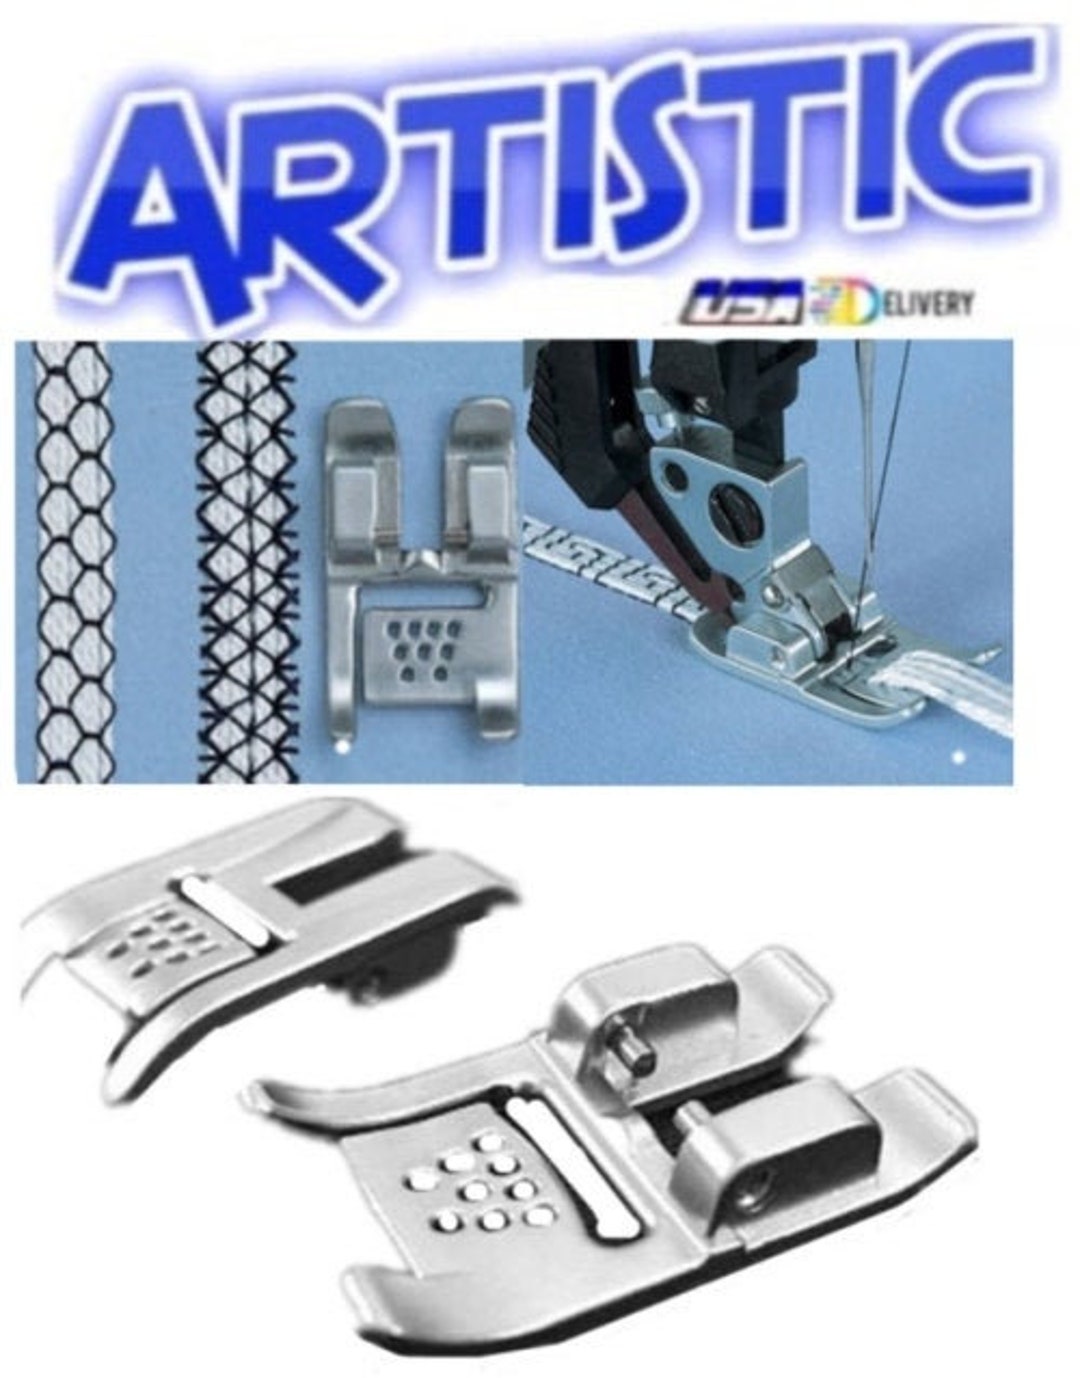 Pearl Attaching Presser Foot - Computerized Sewing - Sewing - Accessories